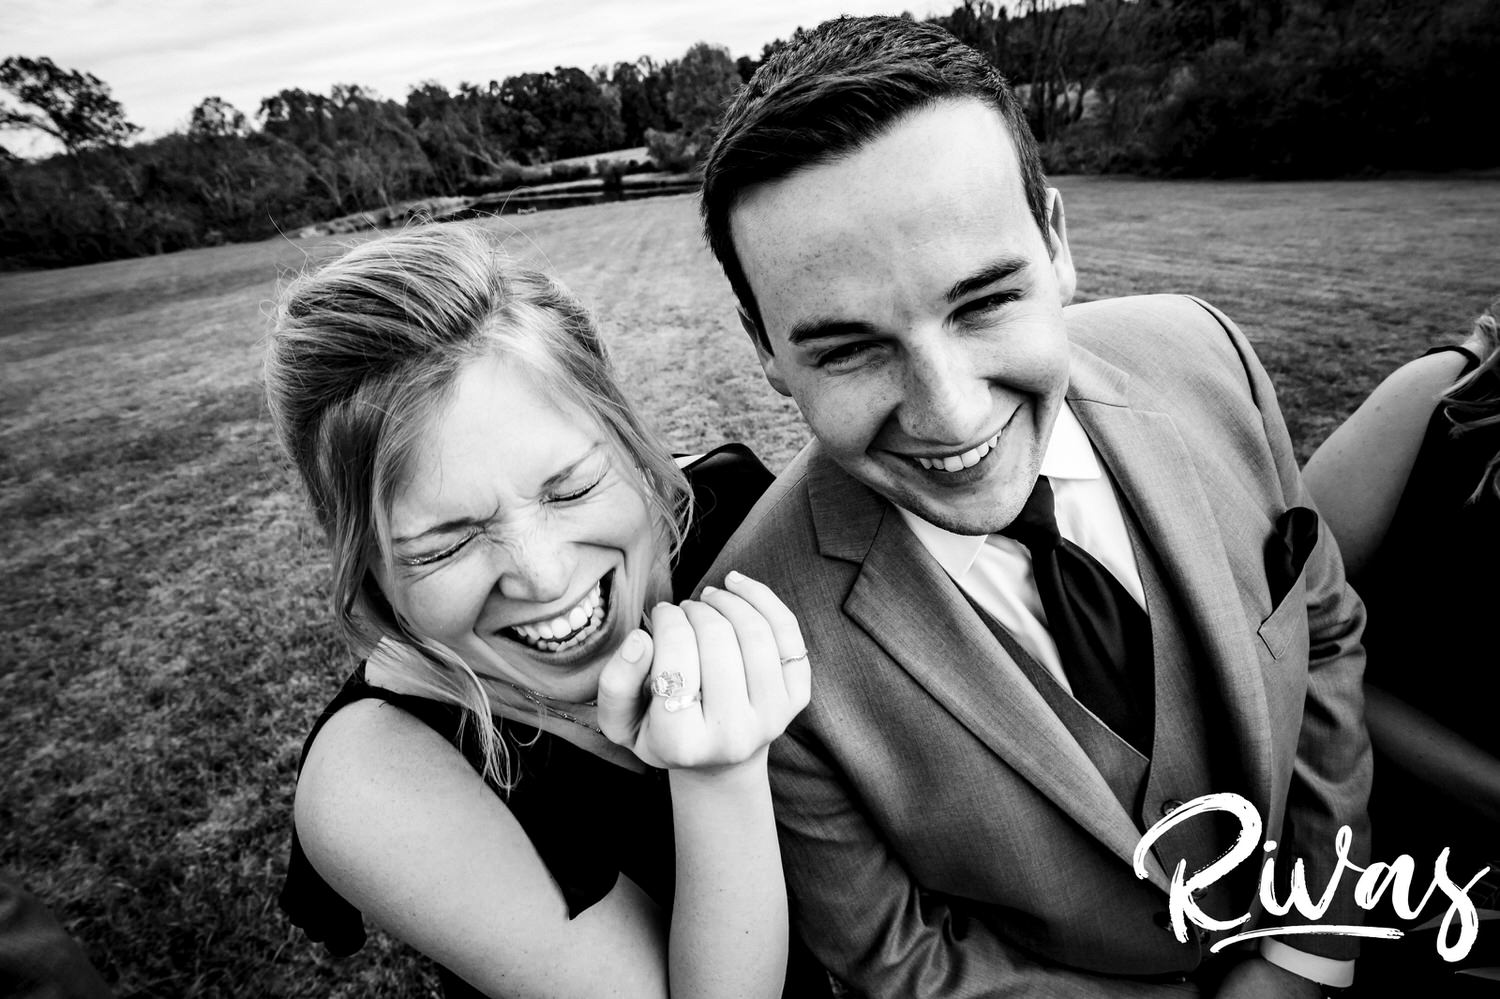 A candid, close-up, black and white picture of a bridesmaid and groomsman laughing hysterically on a fall wedding day.